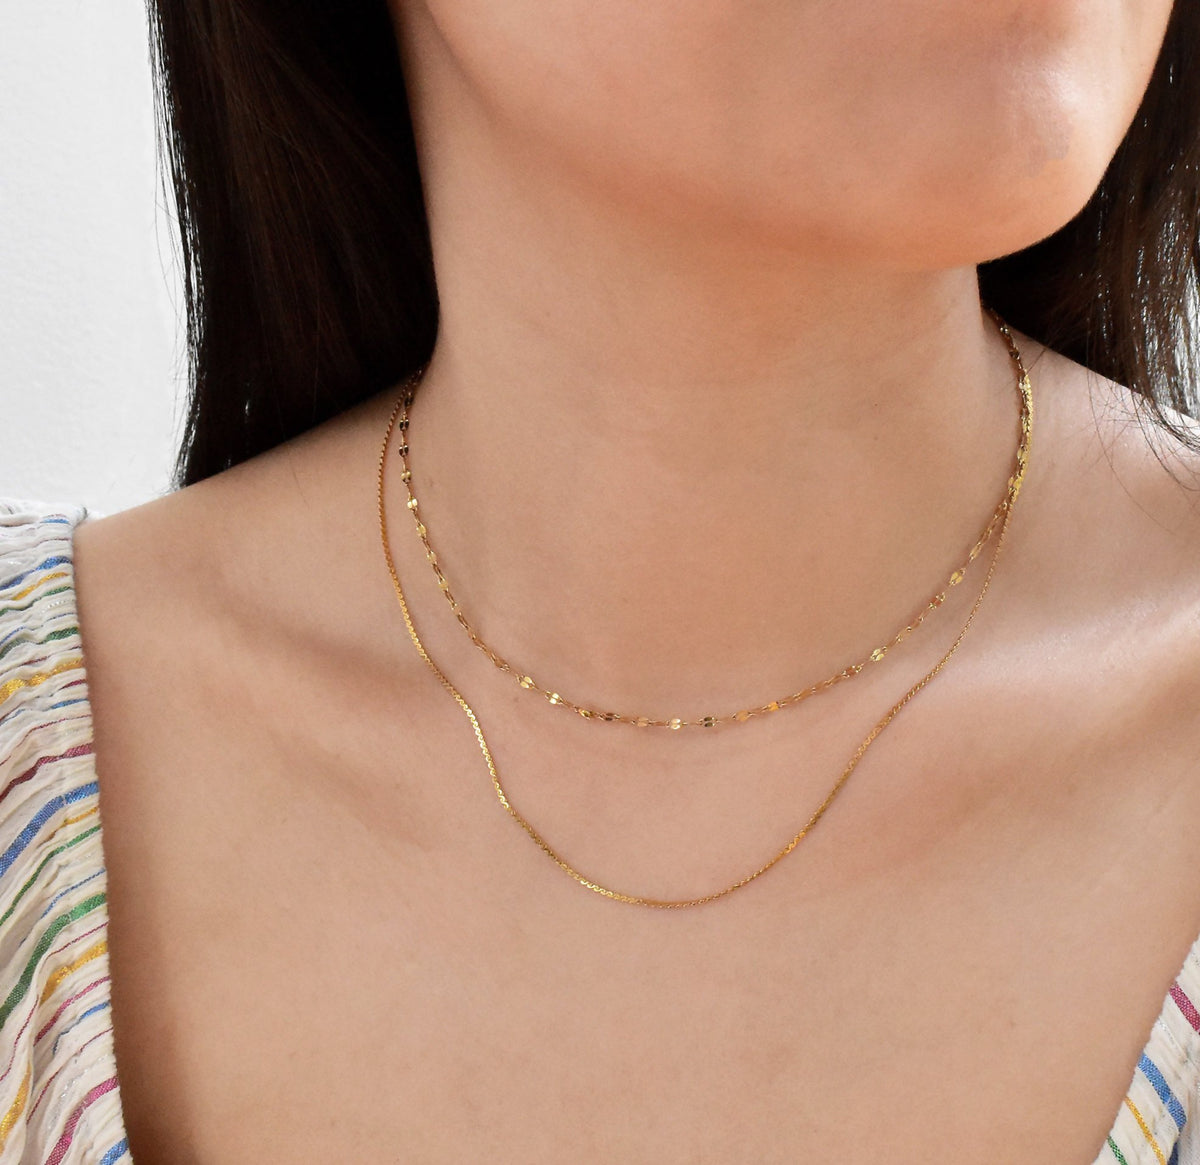 ELSIE GOLD DAINTY LACE CHAIN NECKLACE